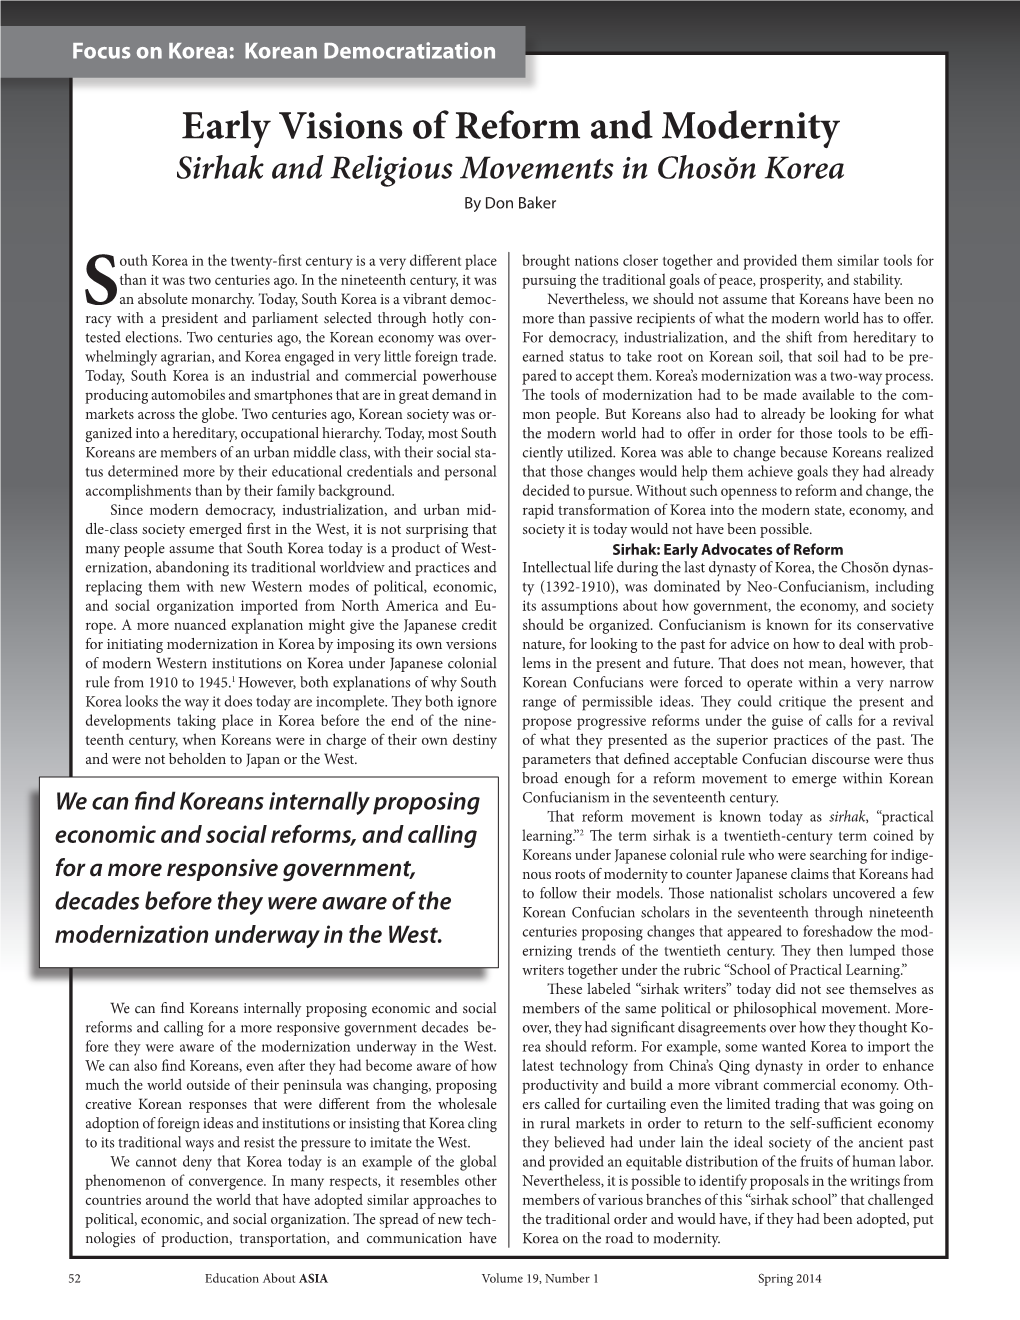 Early Visions of Reform and Modernity Sirhak and Religious Movements in Chosŏn Korea by Don Baker